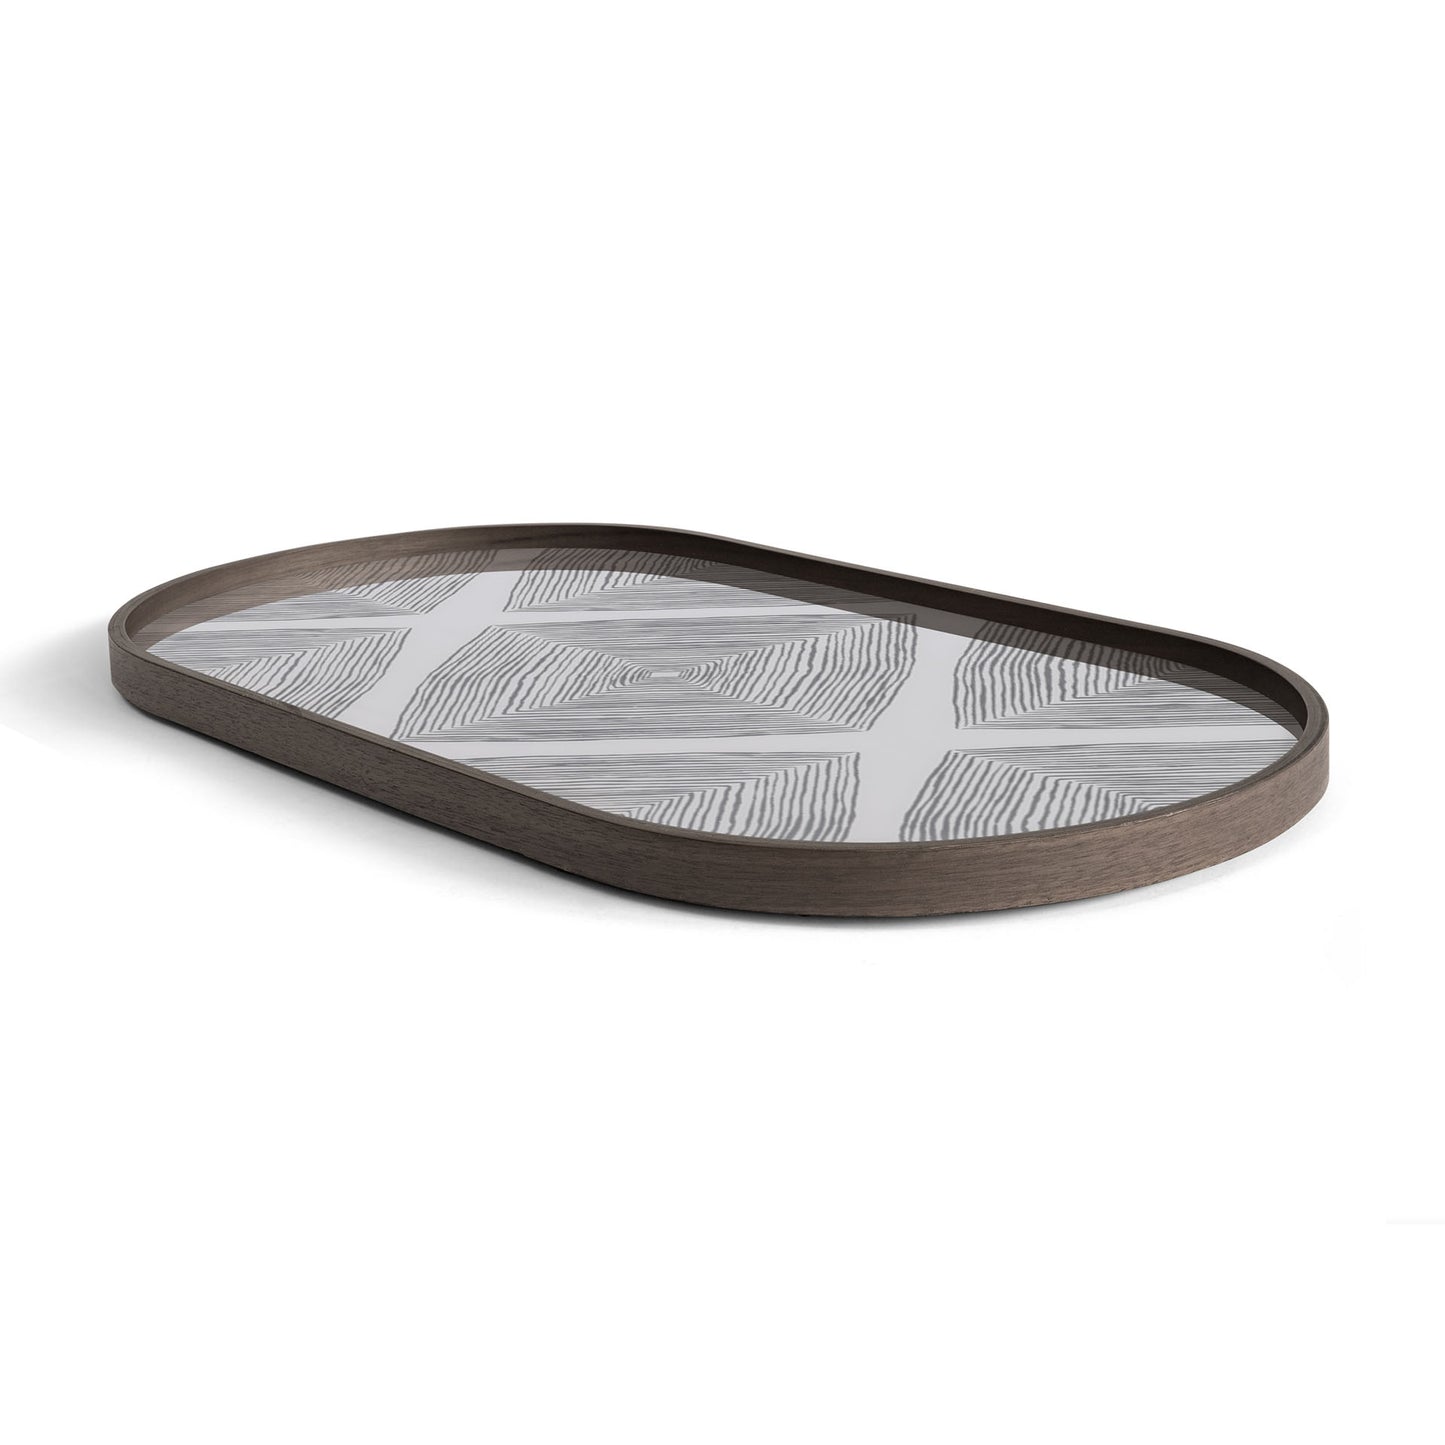 Slate Linear Squares glass tray - Oblong